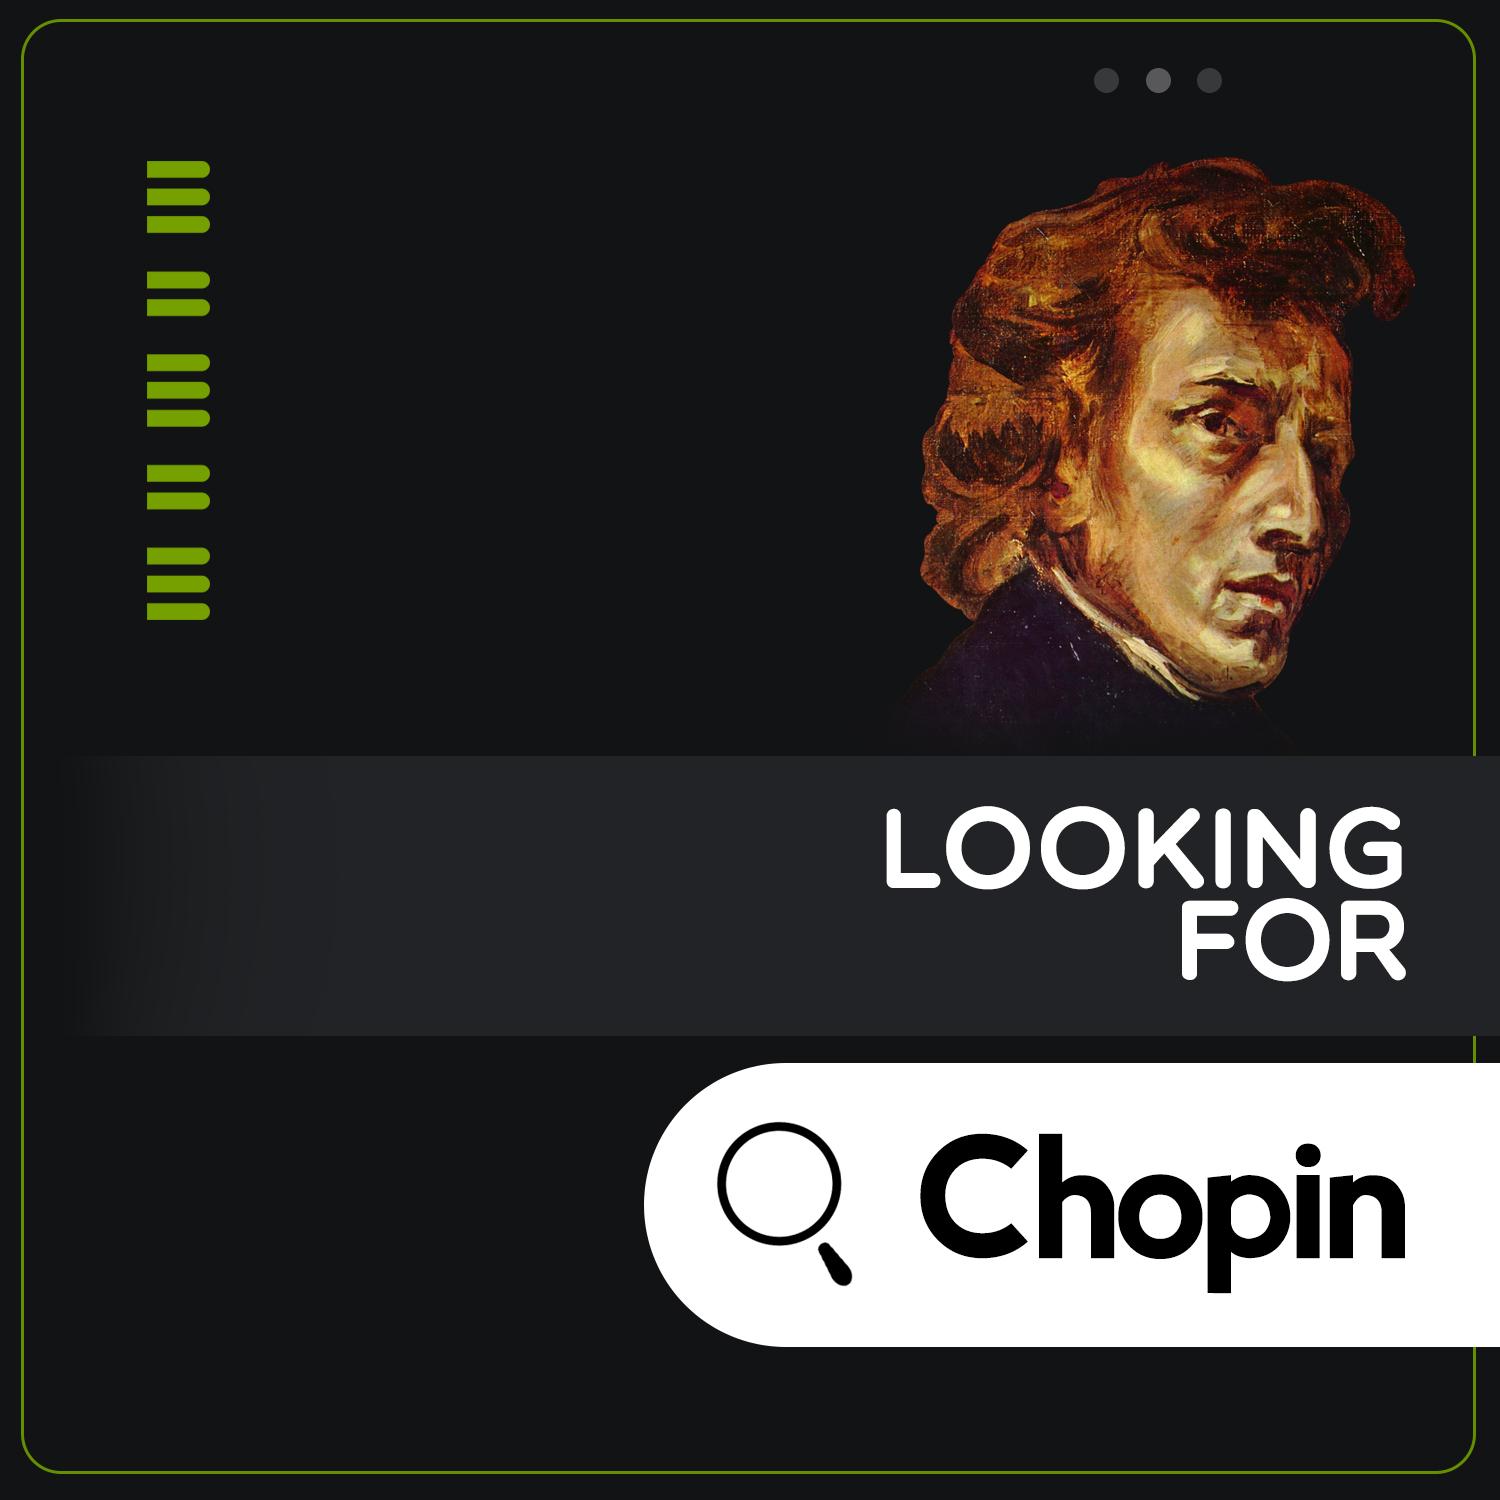 Looking for Chopin